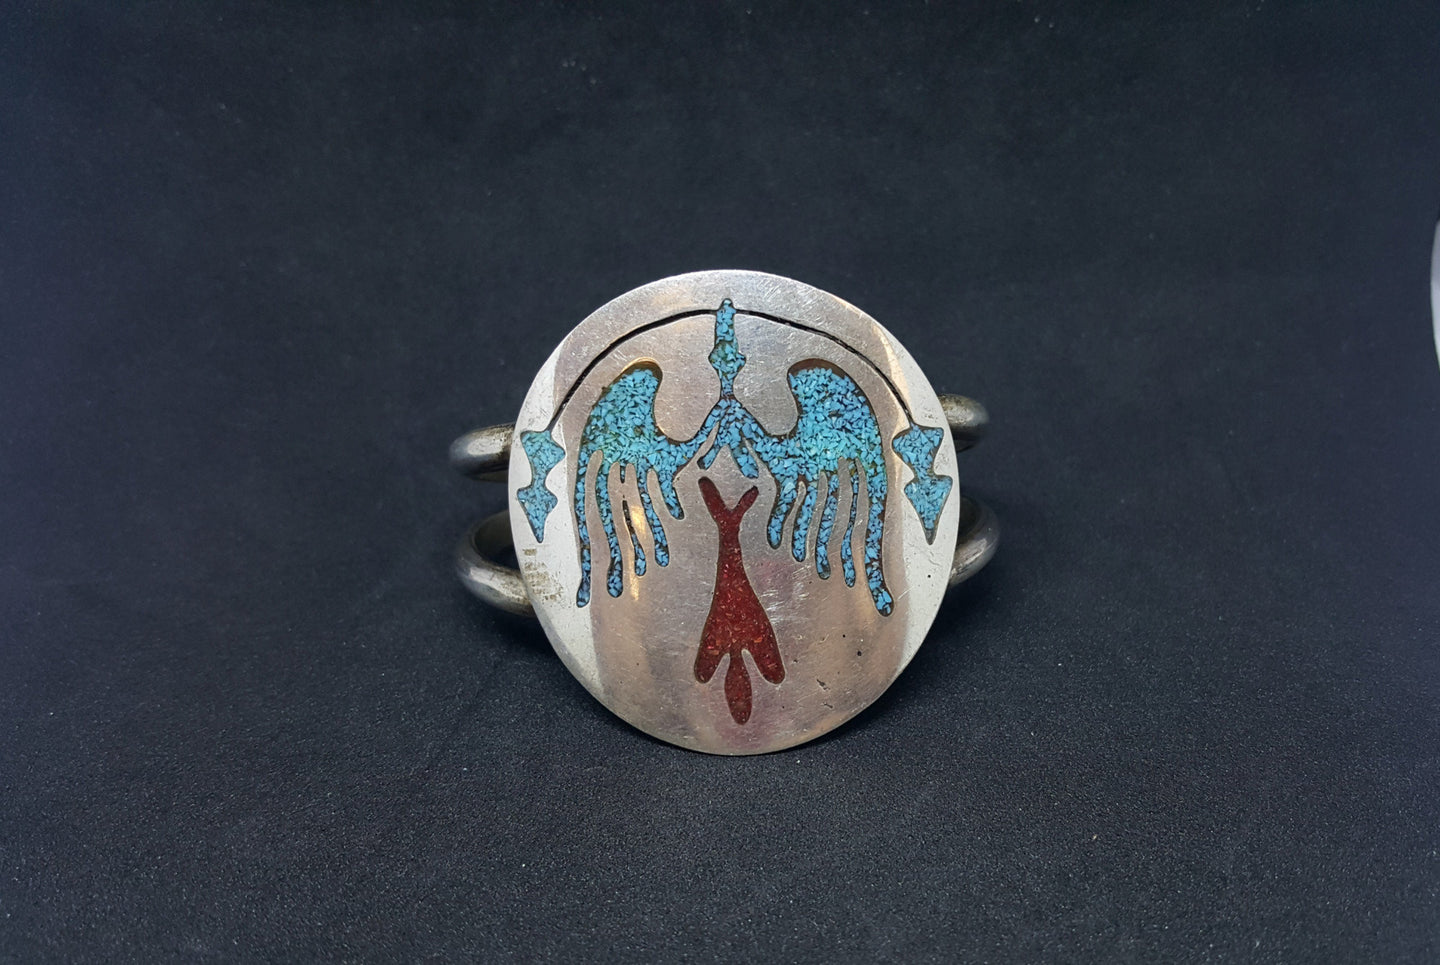 Micro chip Inlay Turquoise Red Coral Peyote Bird sterling silver cuff bracelet - VINTAGE